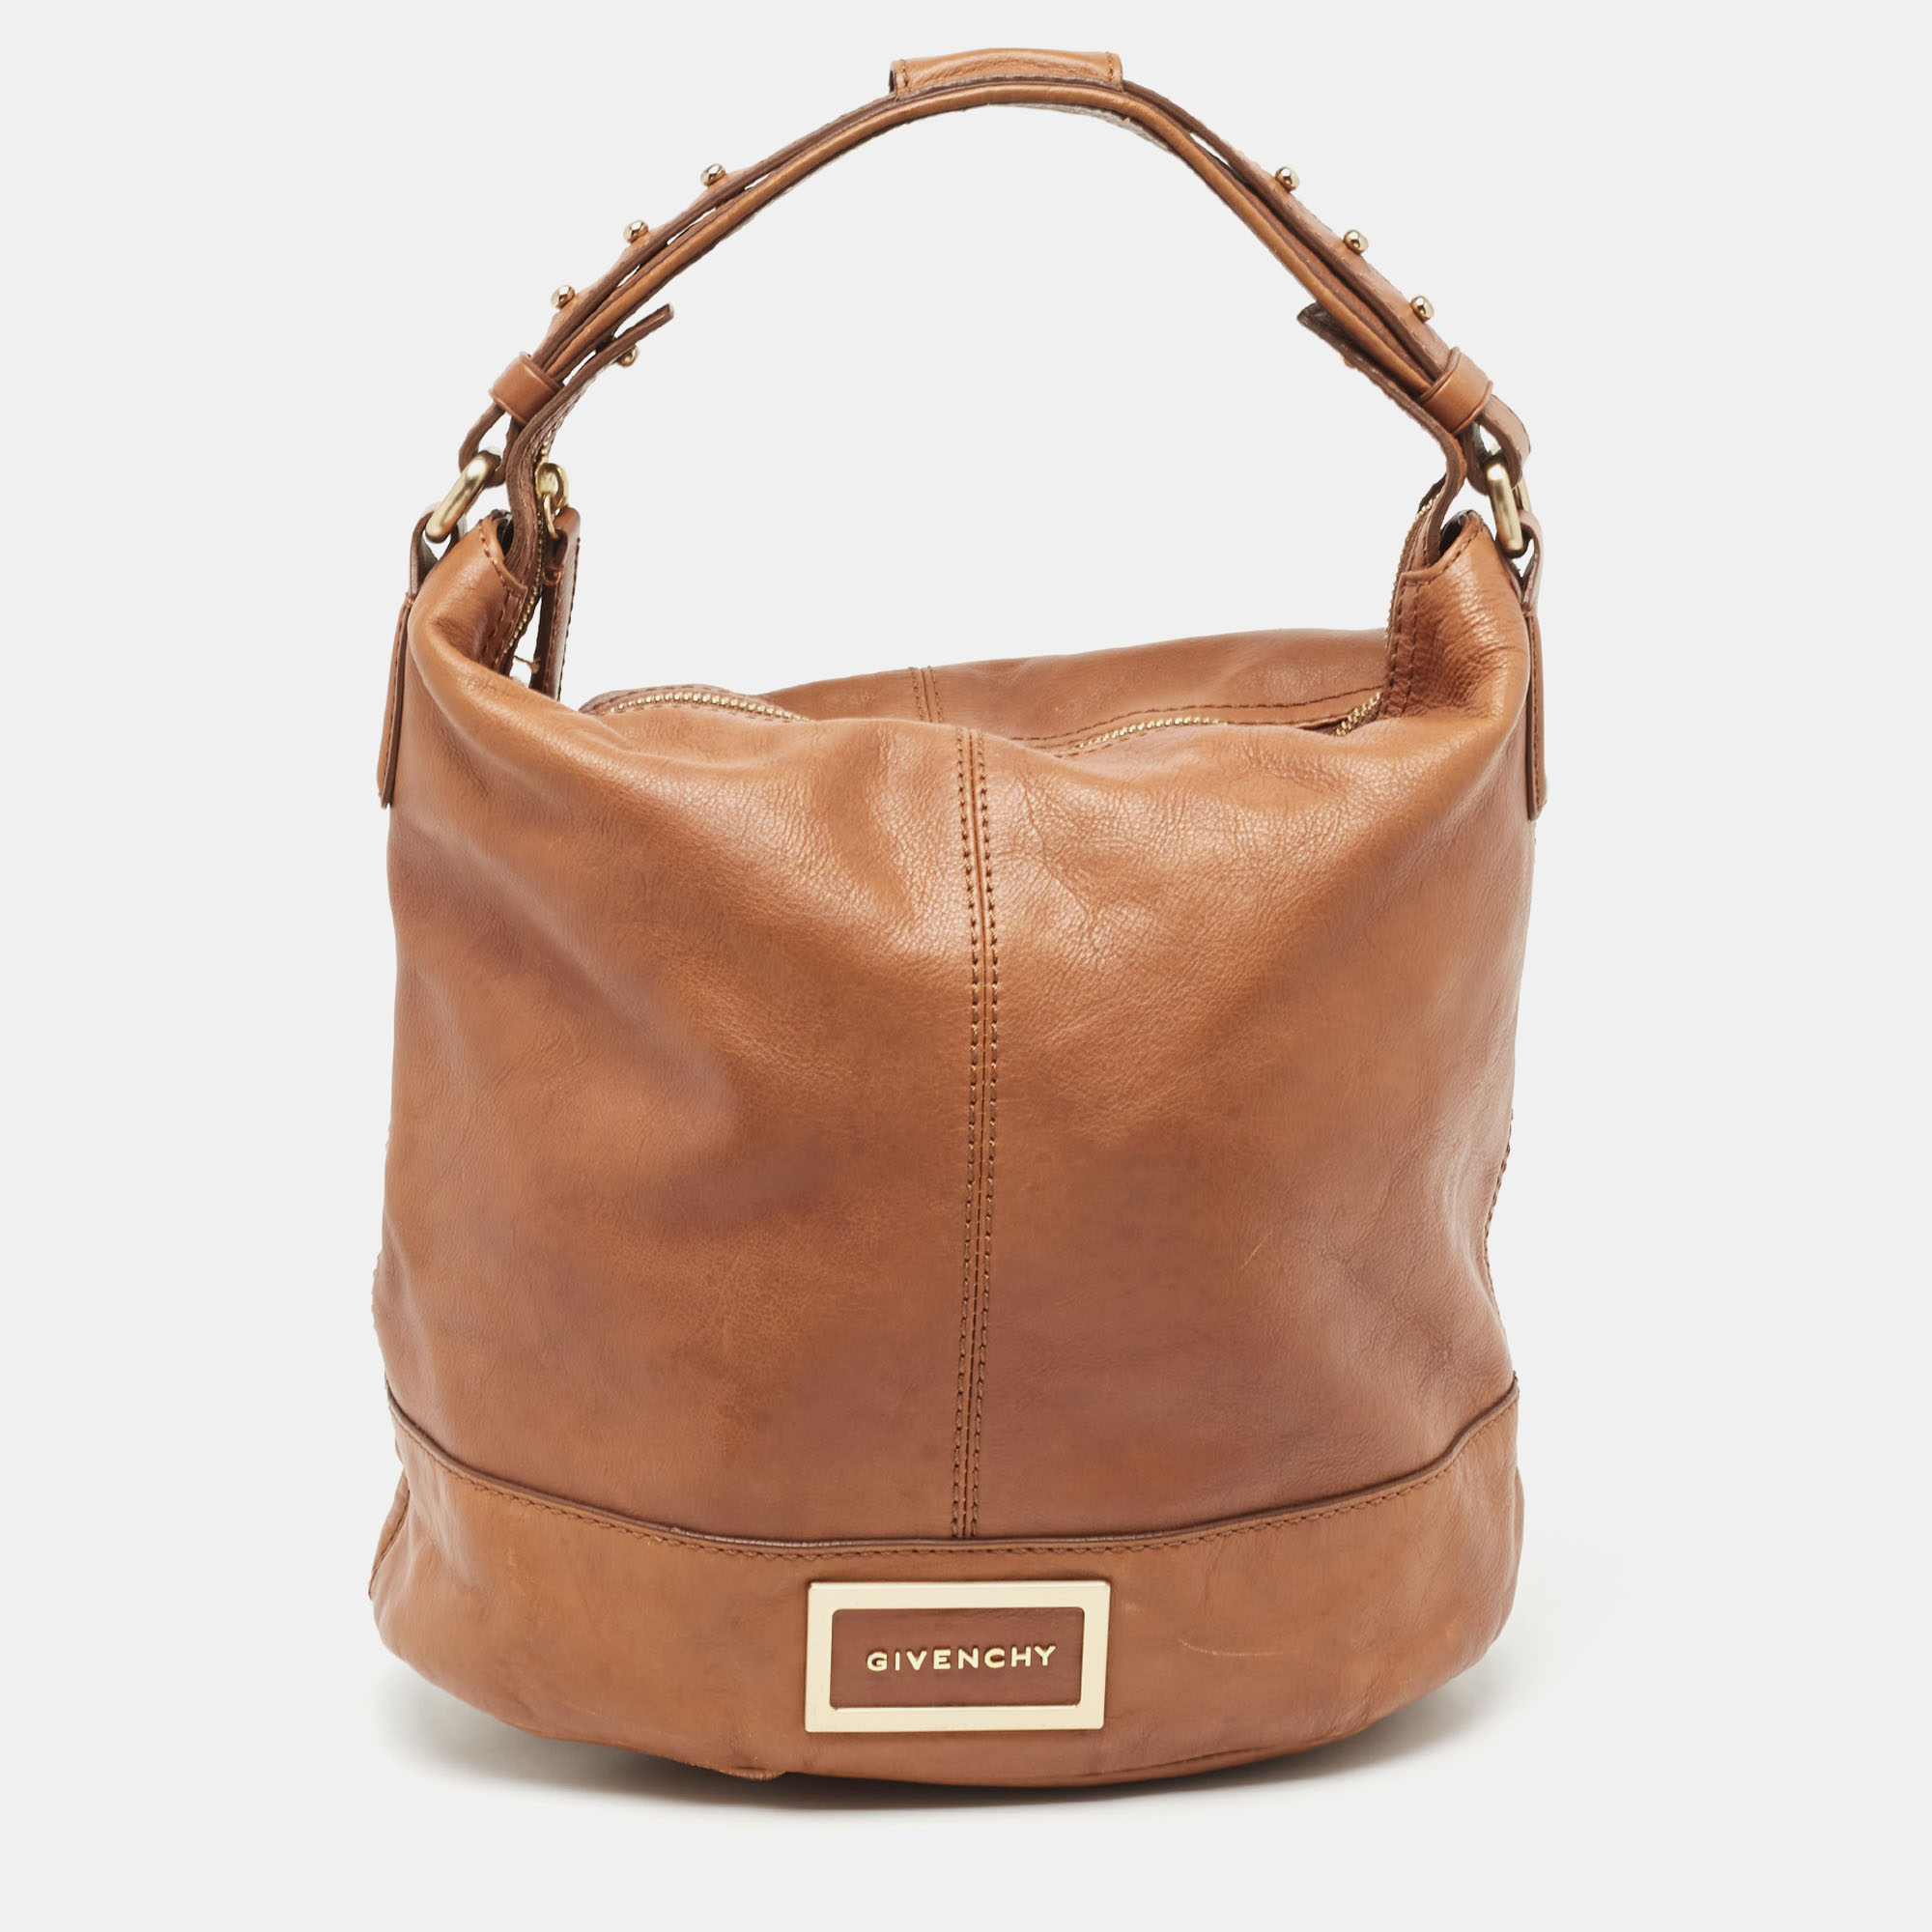 Stylish handbags never fail to make a fashionable impression. Make this designer hobo yours by pairing it with your sophisticated workwear as well as chic casual looks.